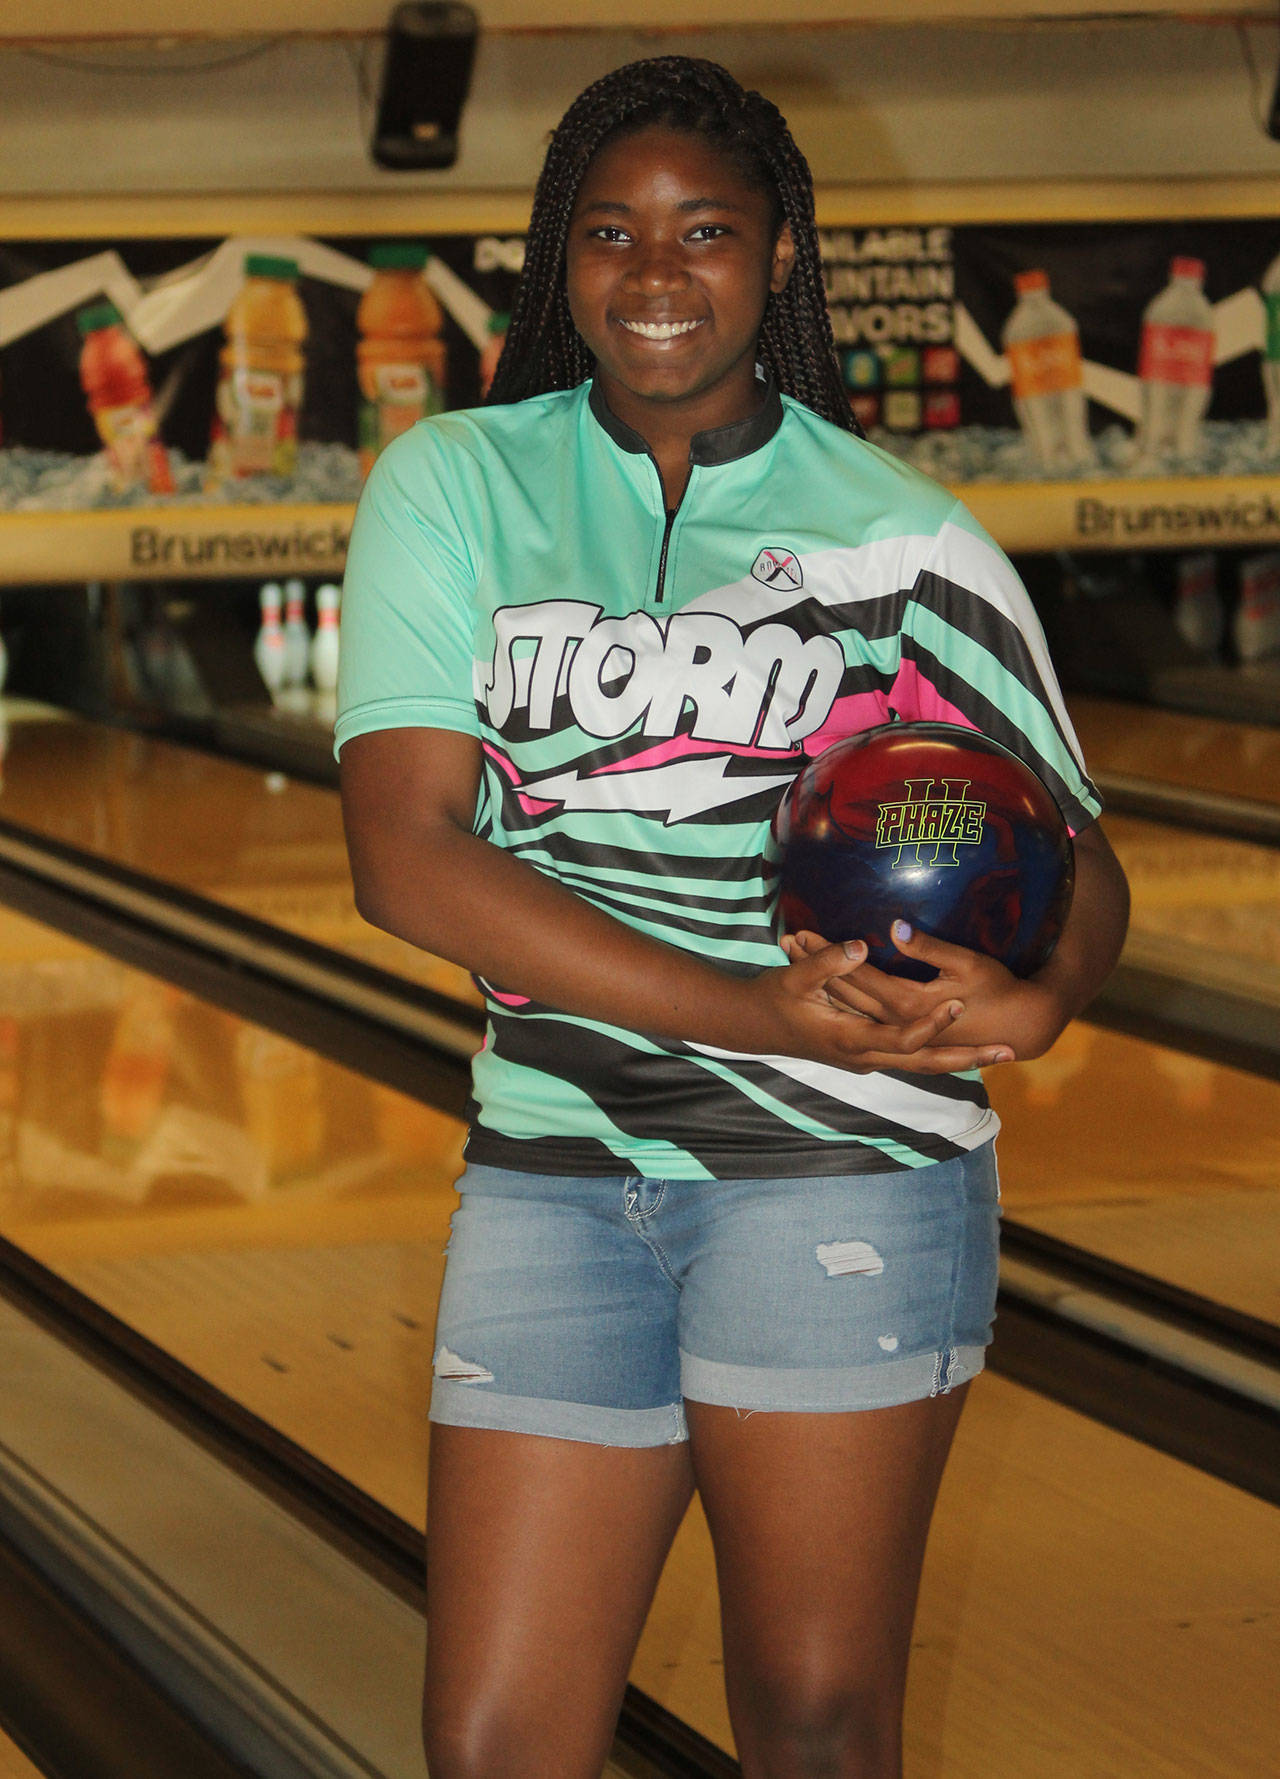 Victorya White bowled in the national youth championship tournament last week. (Photo by Jim Waller/Whidbey News-Times)